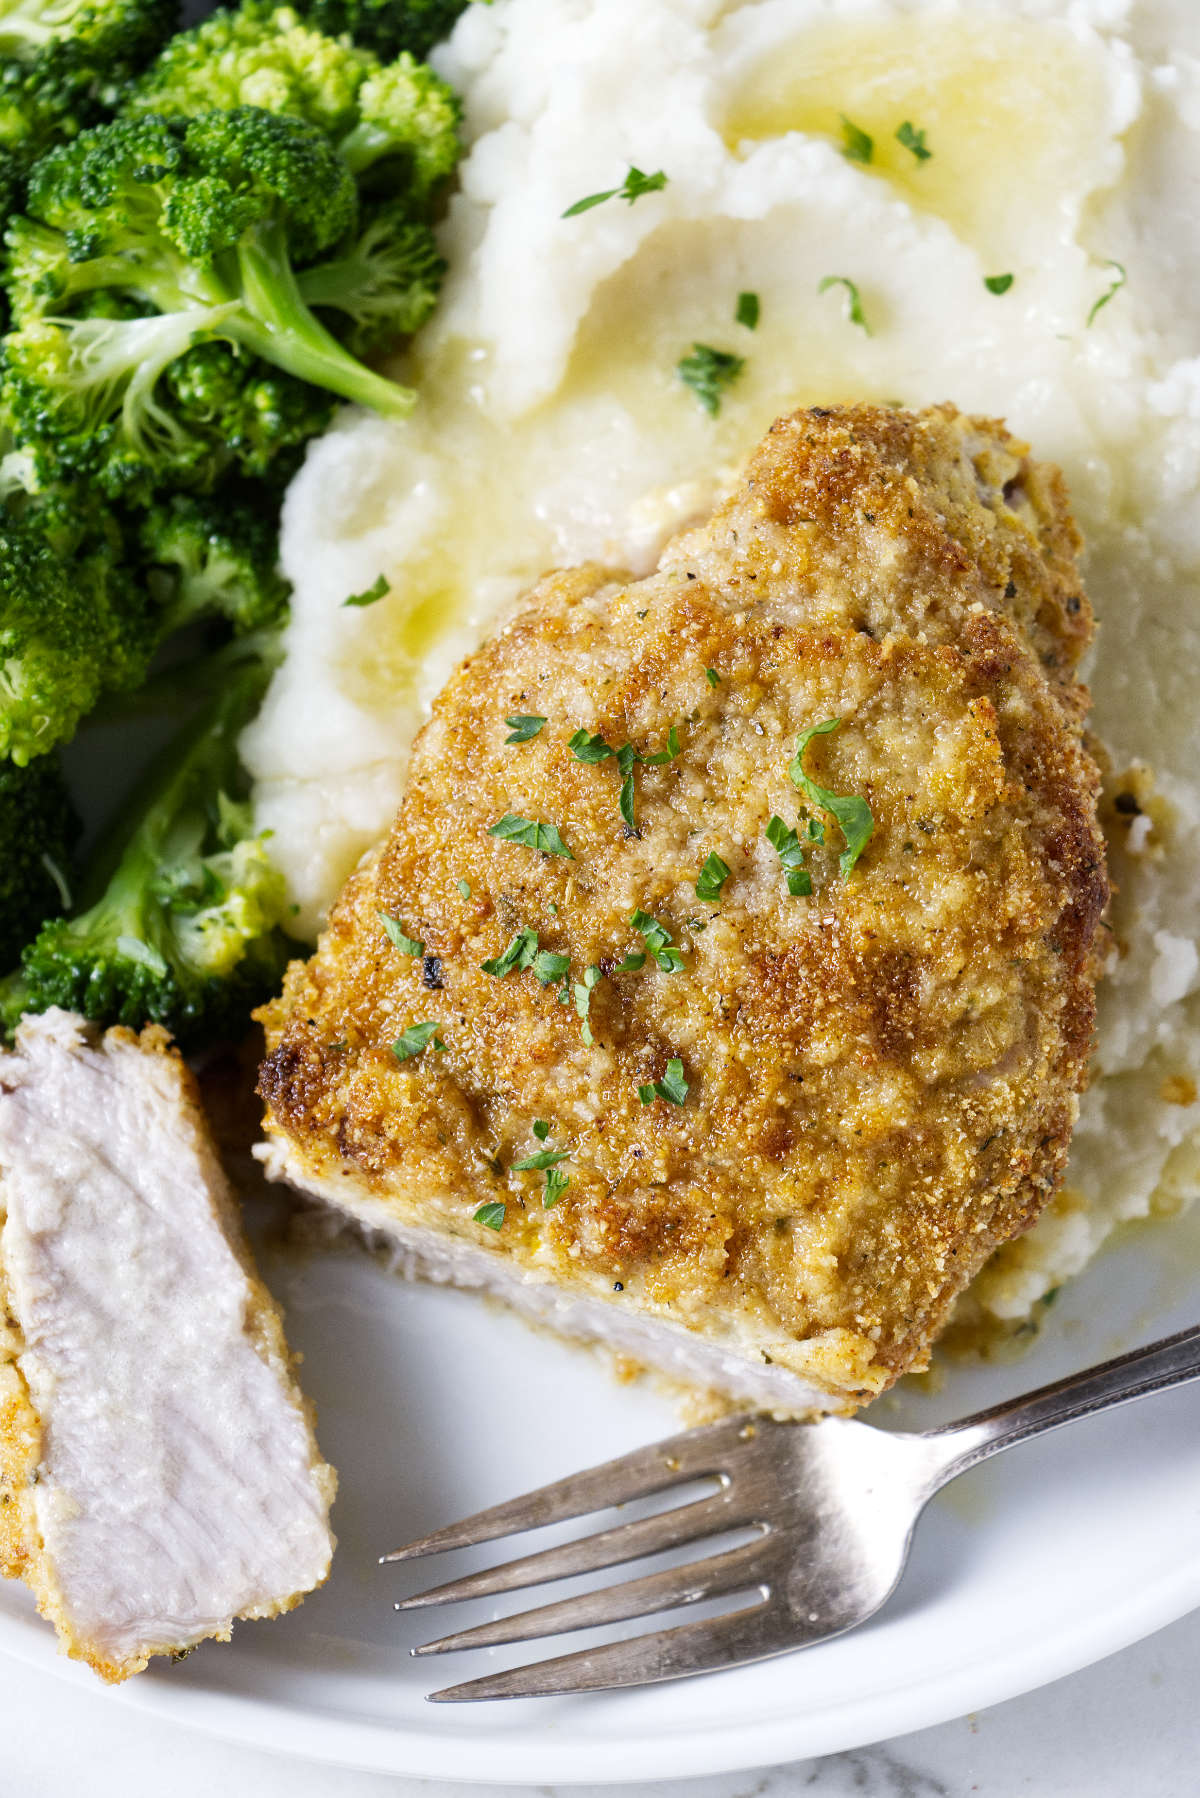 A breaded pork chop on a plate with mashed potatoes and steamed broccoli.